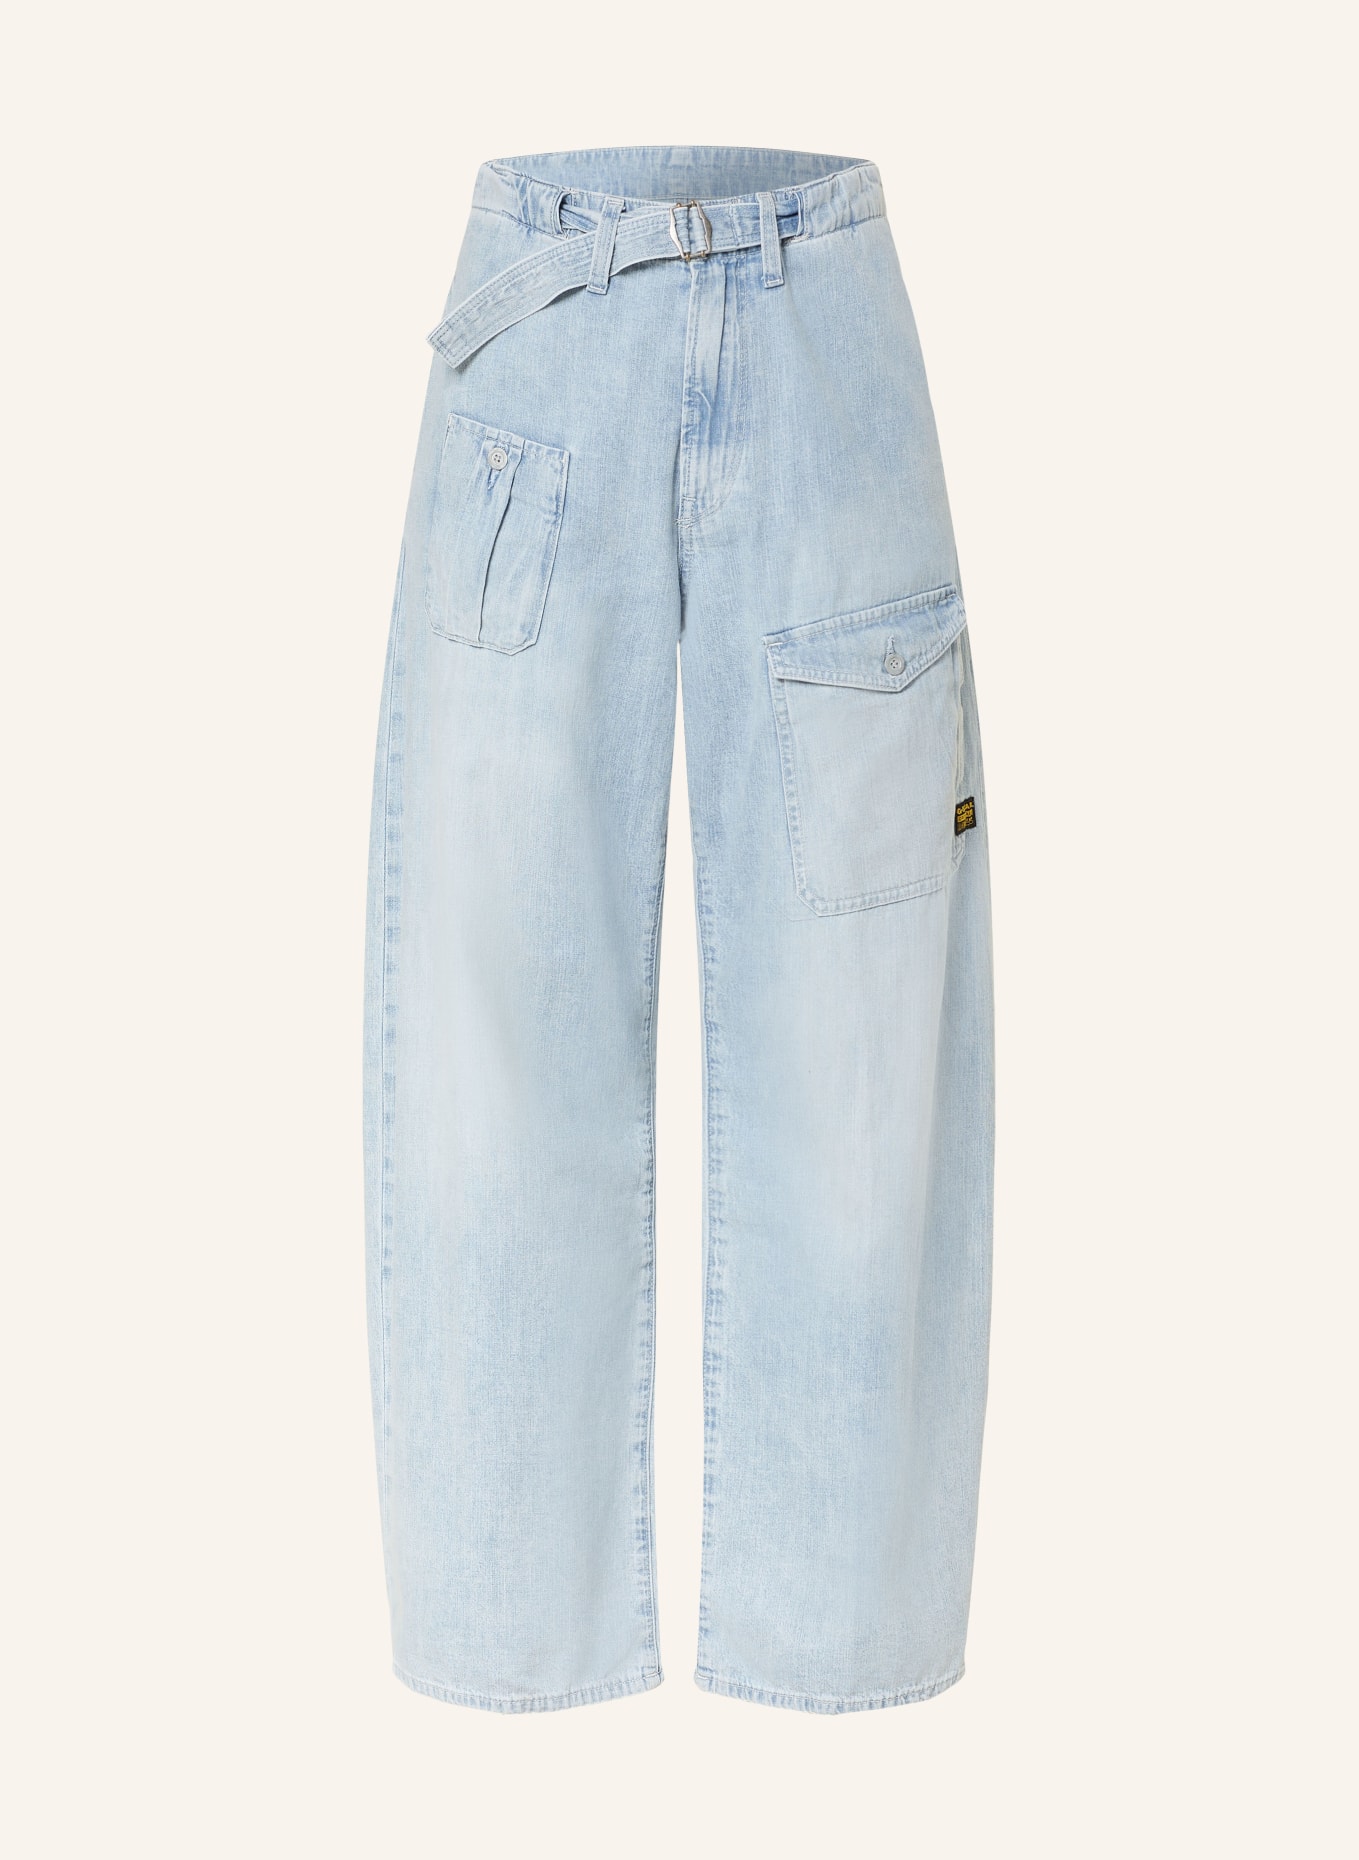 G-Star RAW Cargo jeans, Color: G342 sun faded blue mist (Image 1)